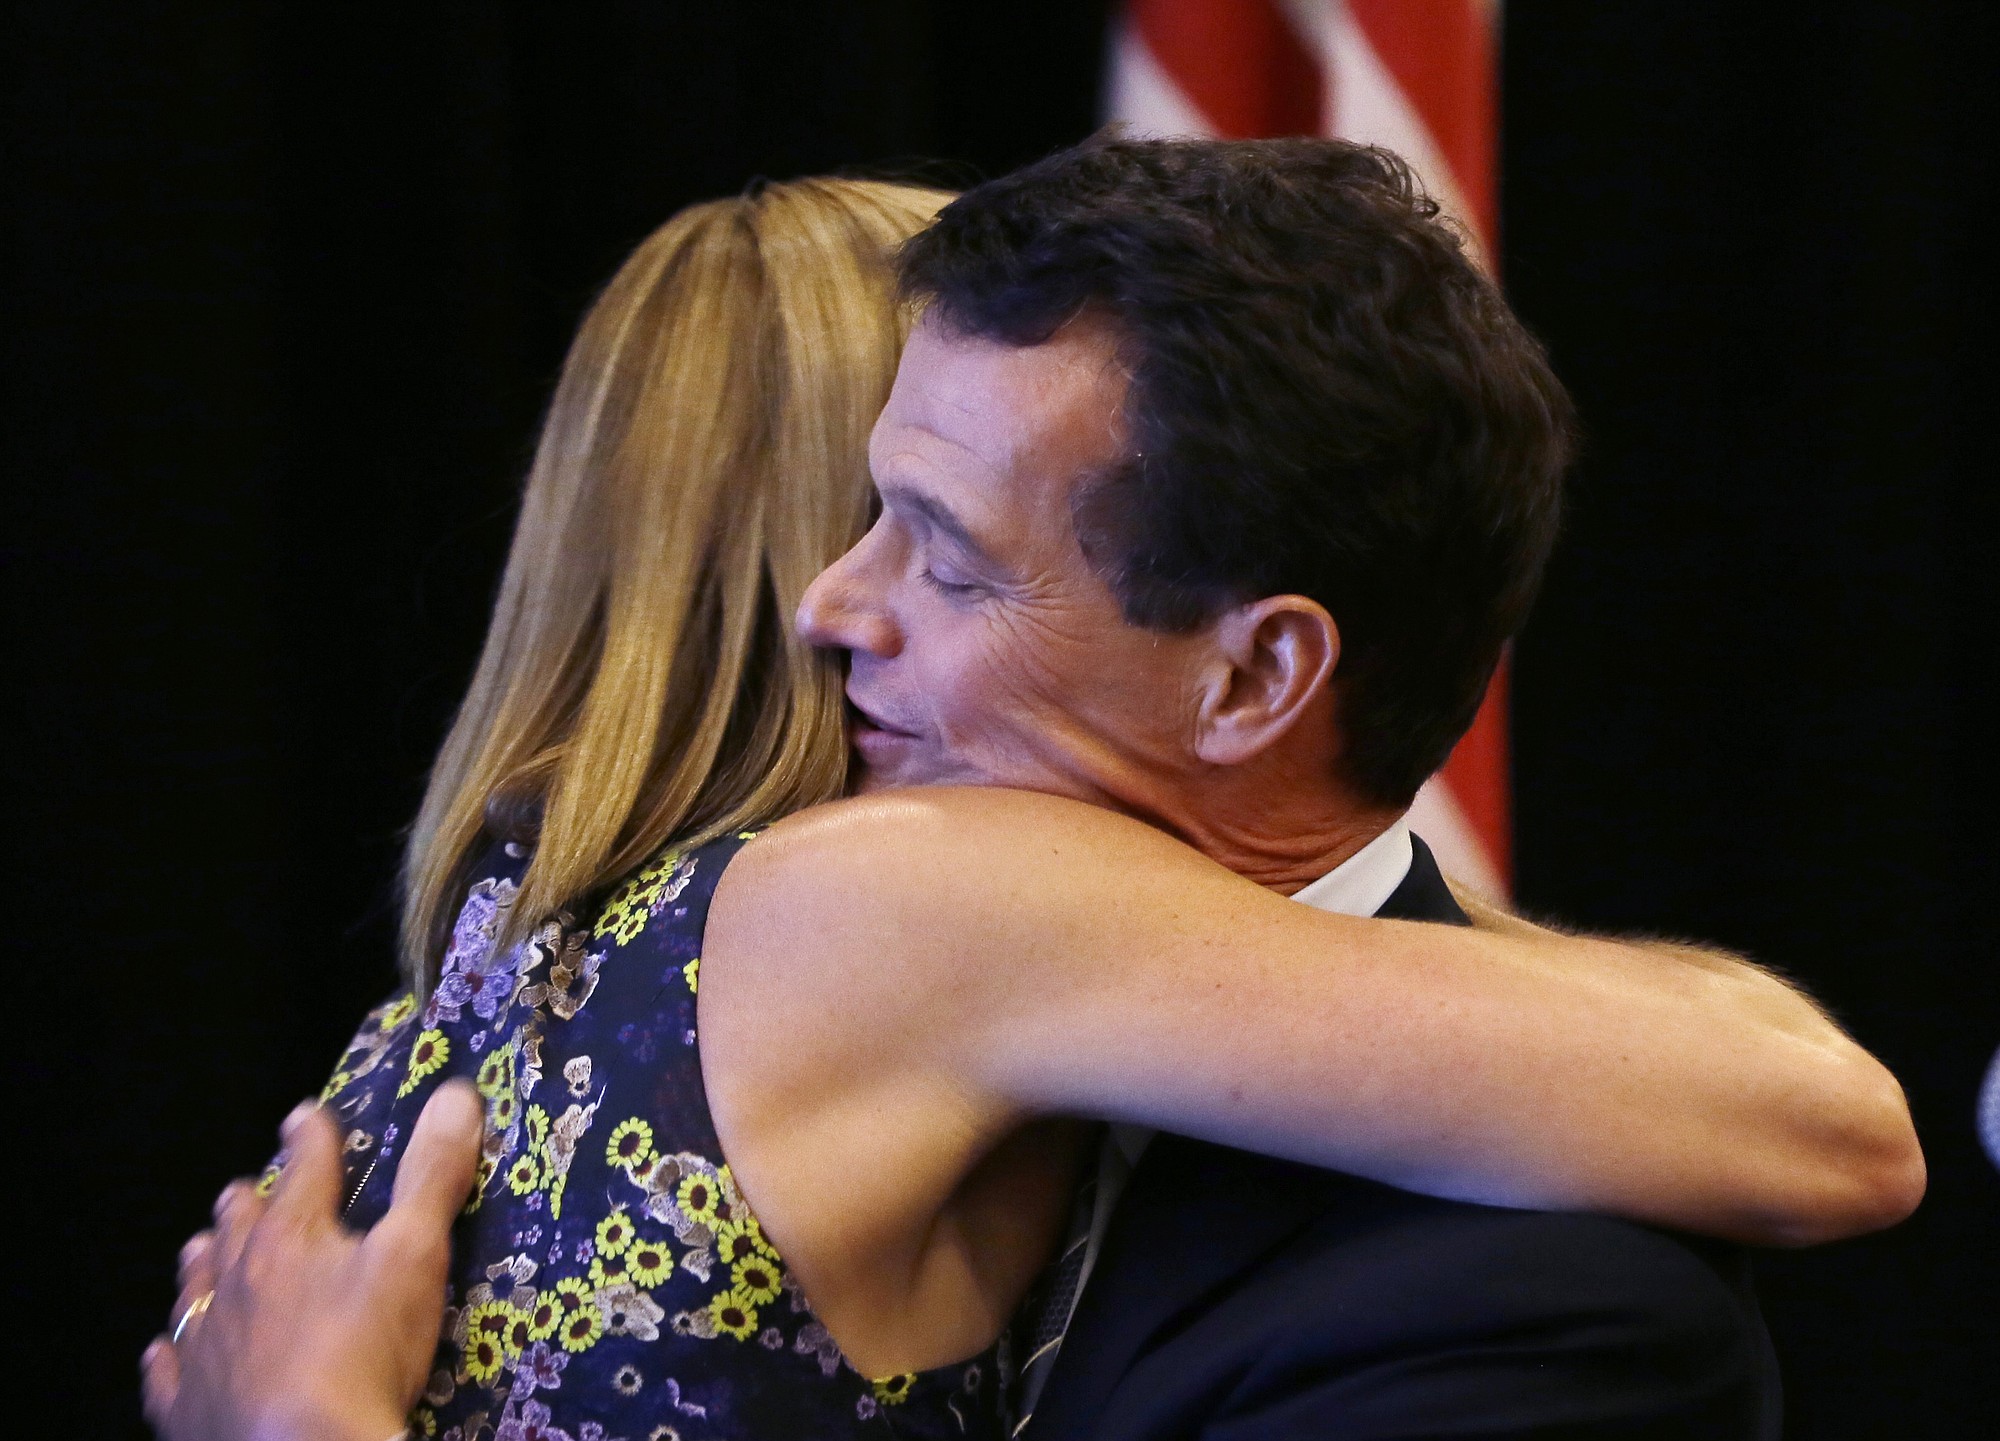 Republican David Trott embraces his wife, Kappy, at his election night party in Troy, Mich., on Tuesday.